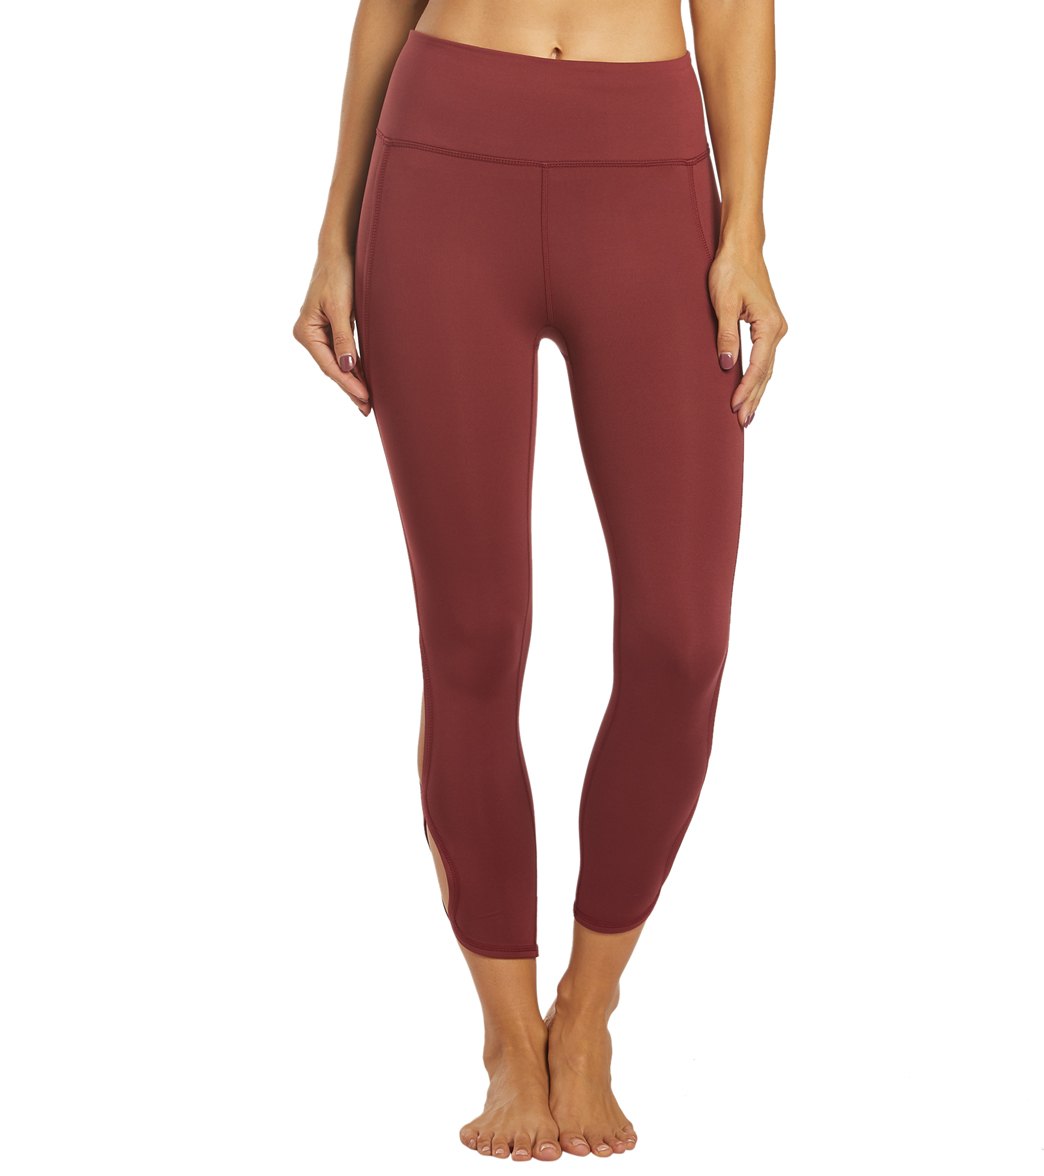 High-Rise 3/4 Infinity Leggings  Free people activewear, Sporty